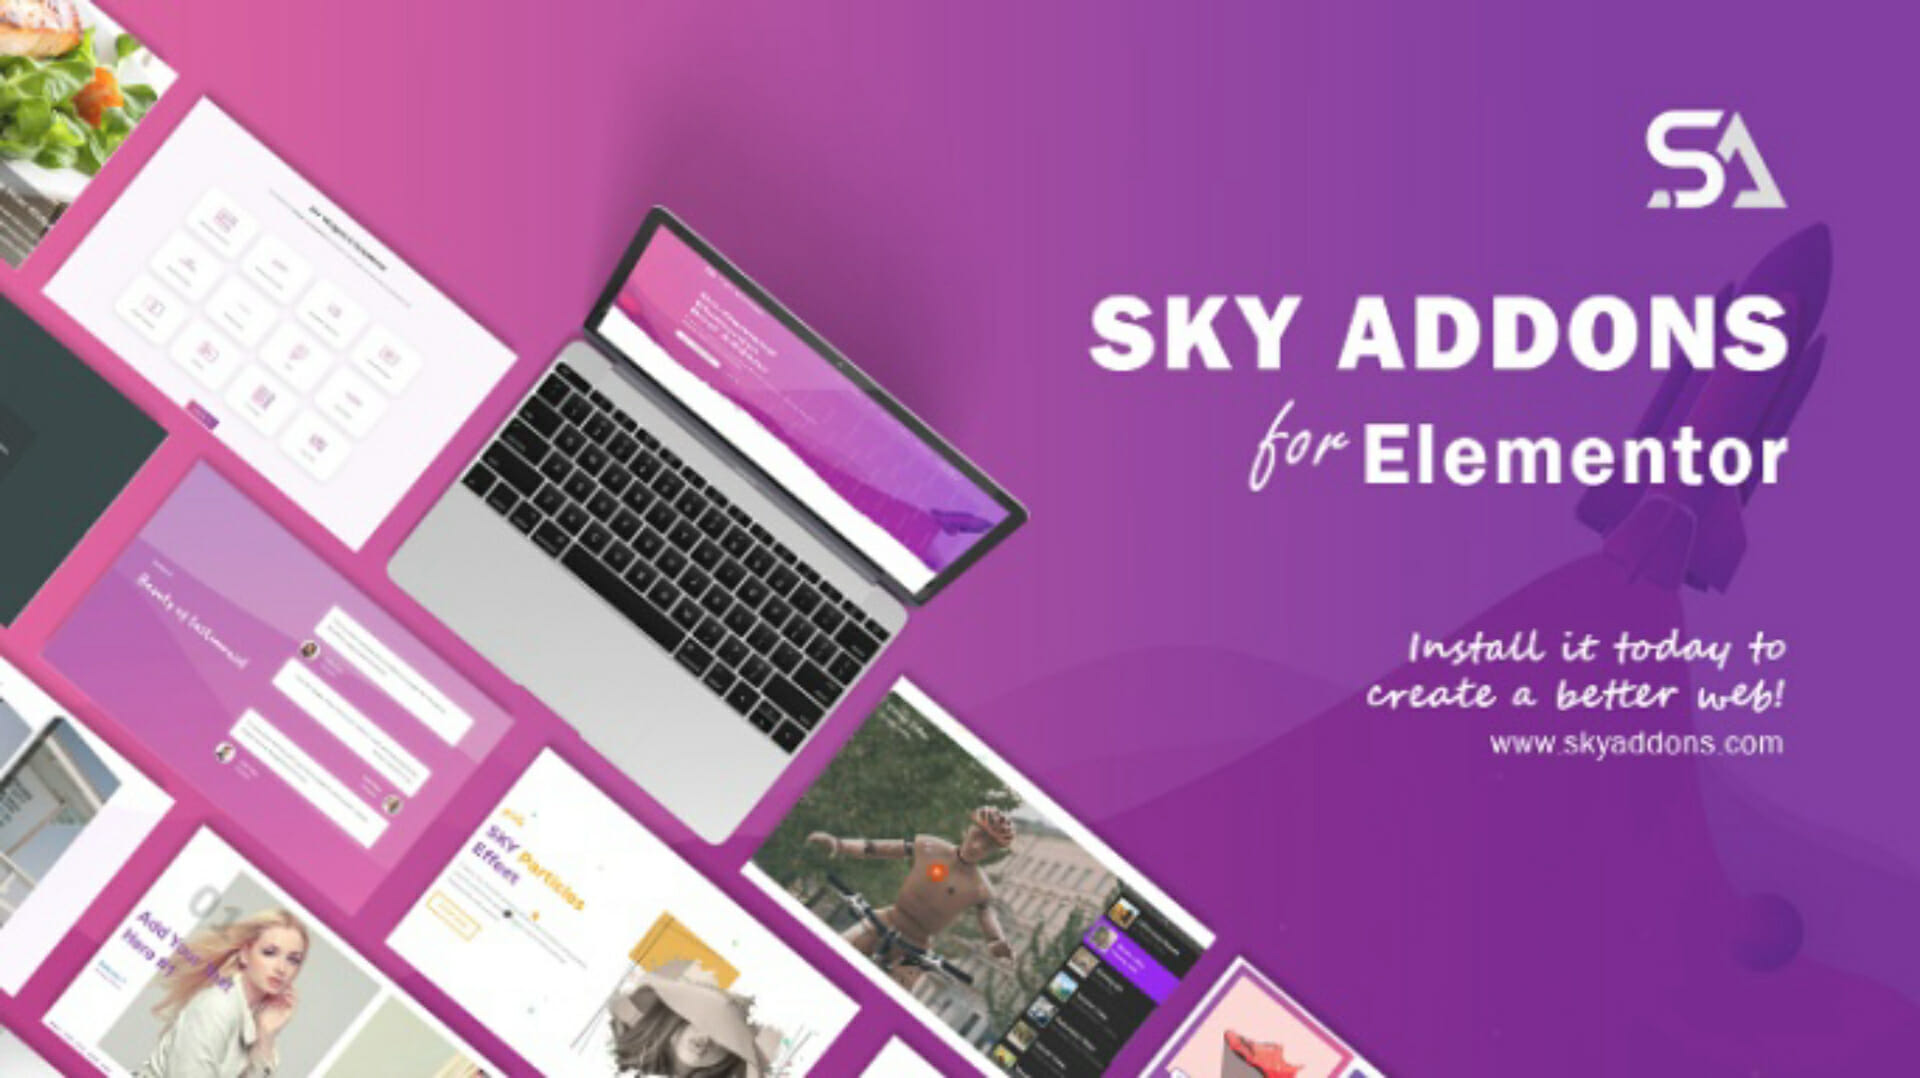 Lifetime Deal to Sky Addons for Elementor: Agency Plan for $117